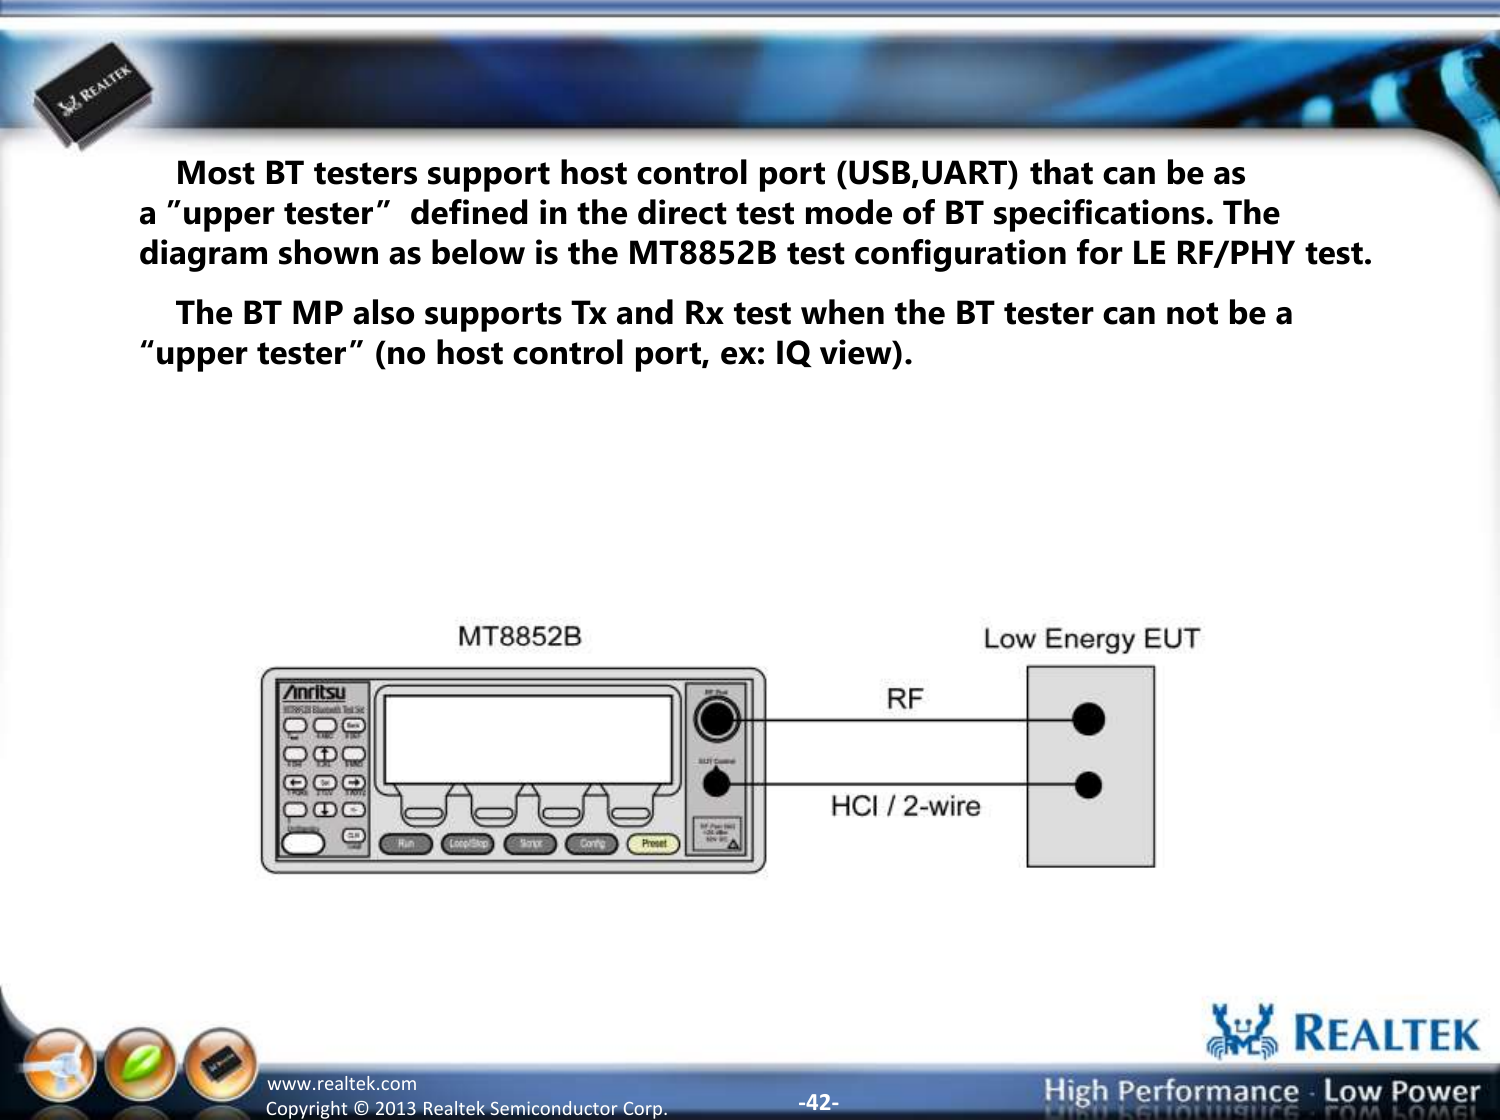 -42- Copyright ©  2013 Realtek Semiconductor Corp. www.realtek.com     Most BT testers support host control port (USB,UART) that can be as a ”upper tester”  defined in the direct test mode of BT specifications. The diagram shown as below is the MT8852B test configuration for LE RF/PHY test.     The BT MP also supports Tx and Rx test when the BT tester can not be a “upper tester” (no host control port, ex: IQ view). 